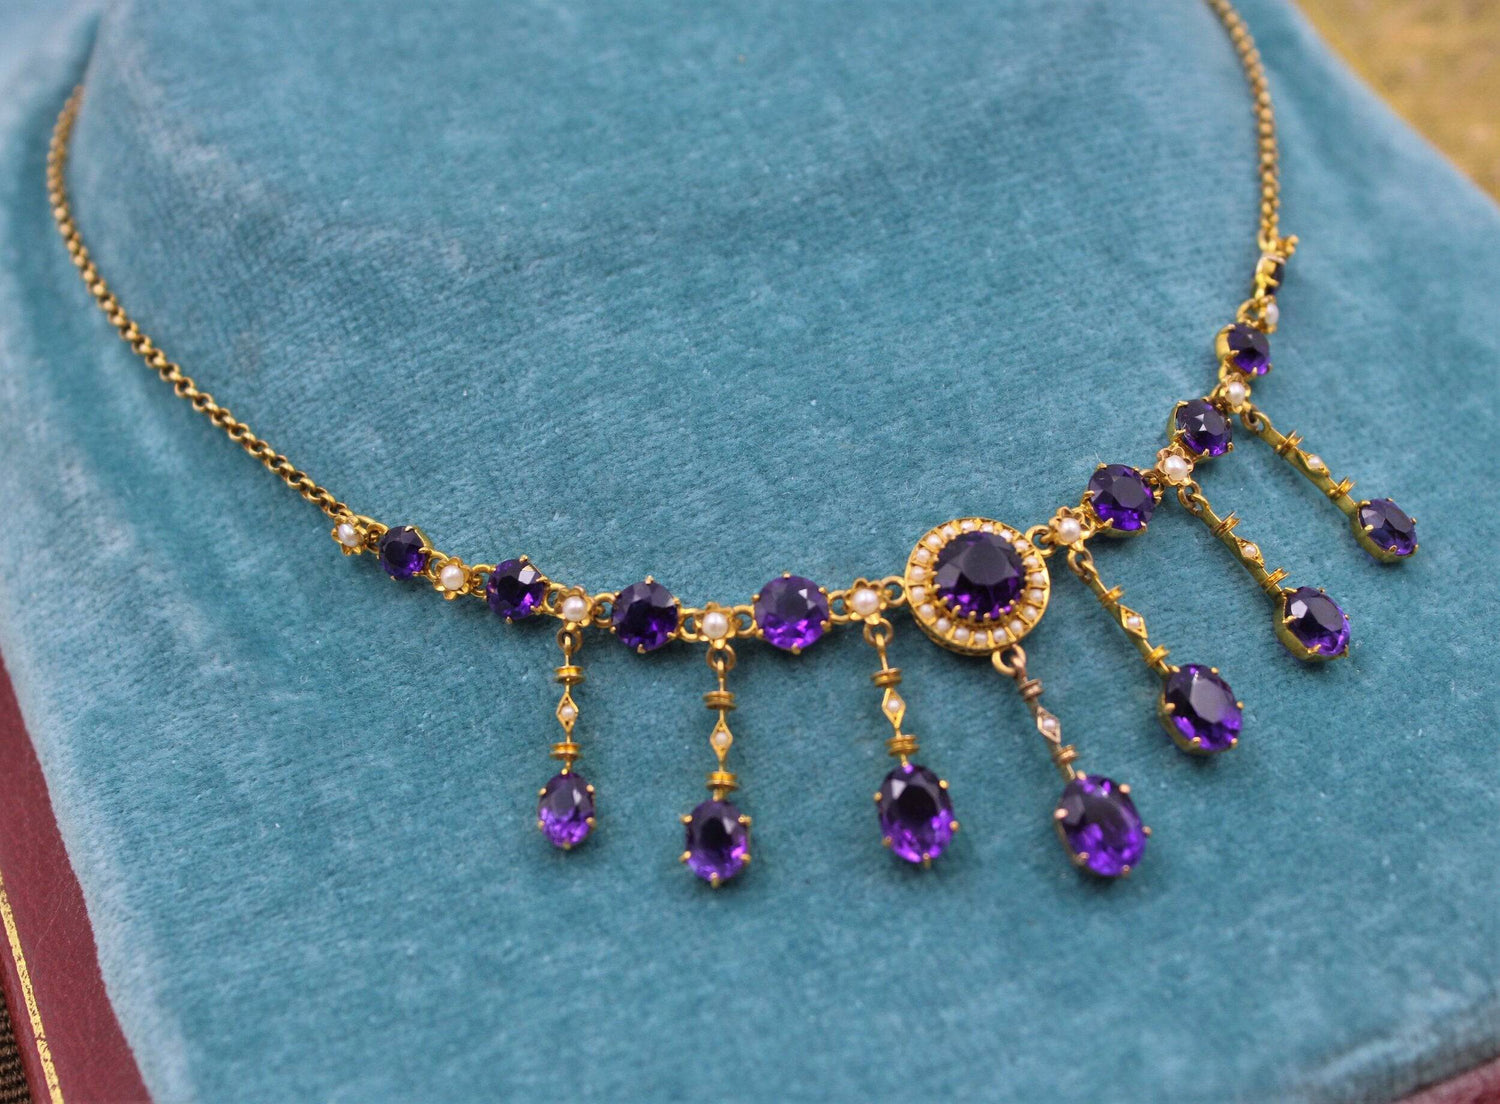 A very fine Edwardian Amethyst & Seed Pearl Necklace in High Carat Yellow Gold, English, Circa 1905 - Robin Haydock Antiques